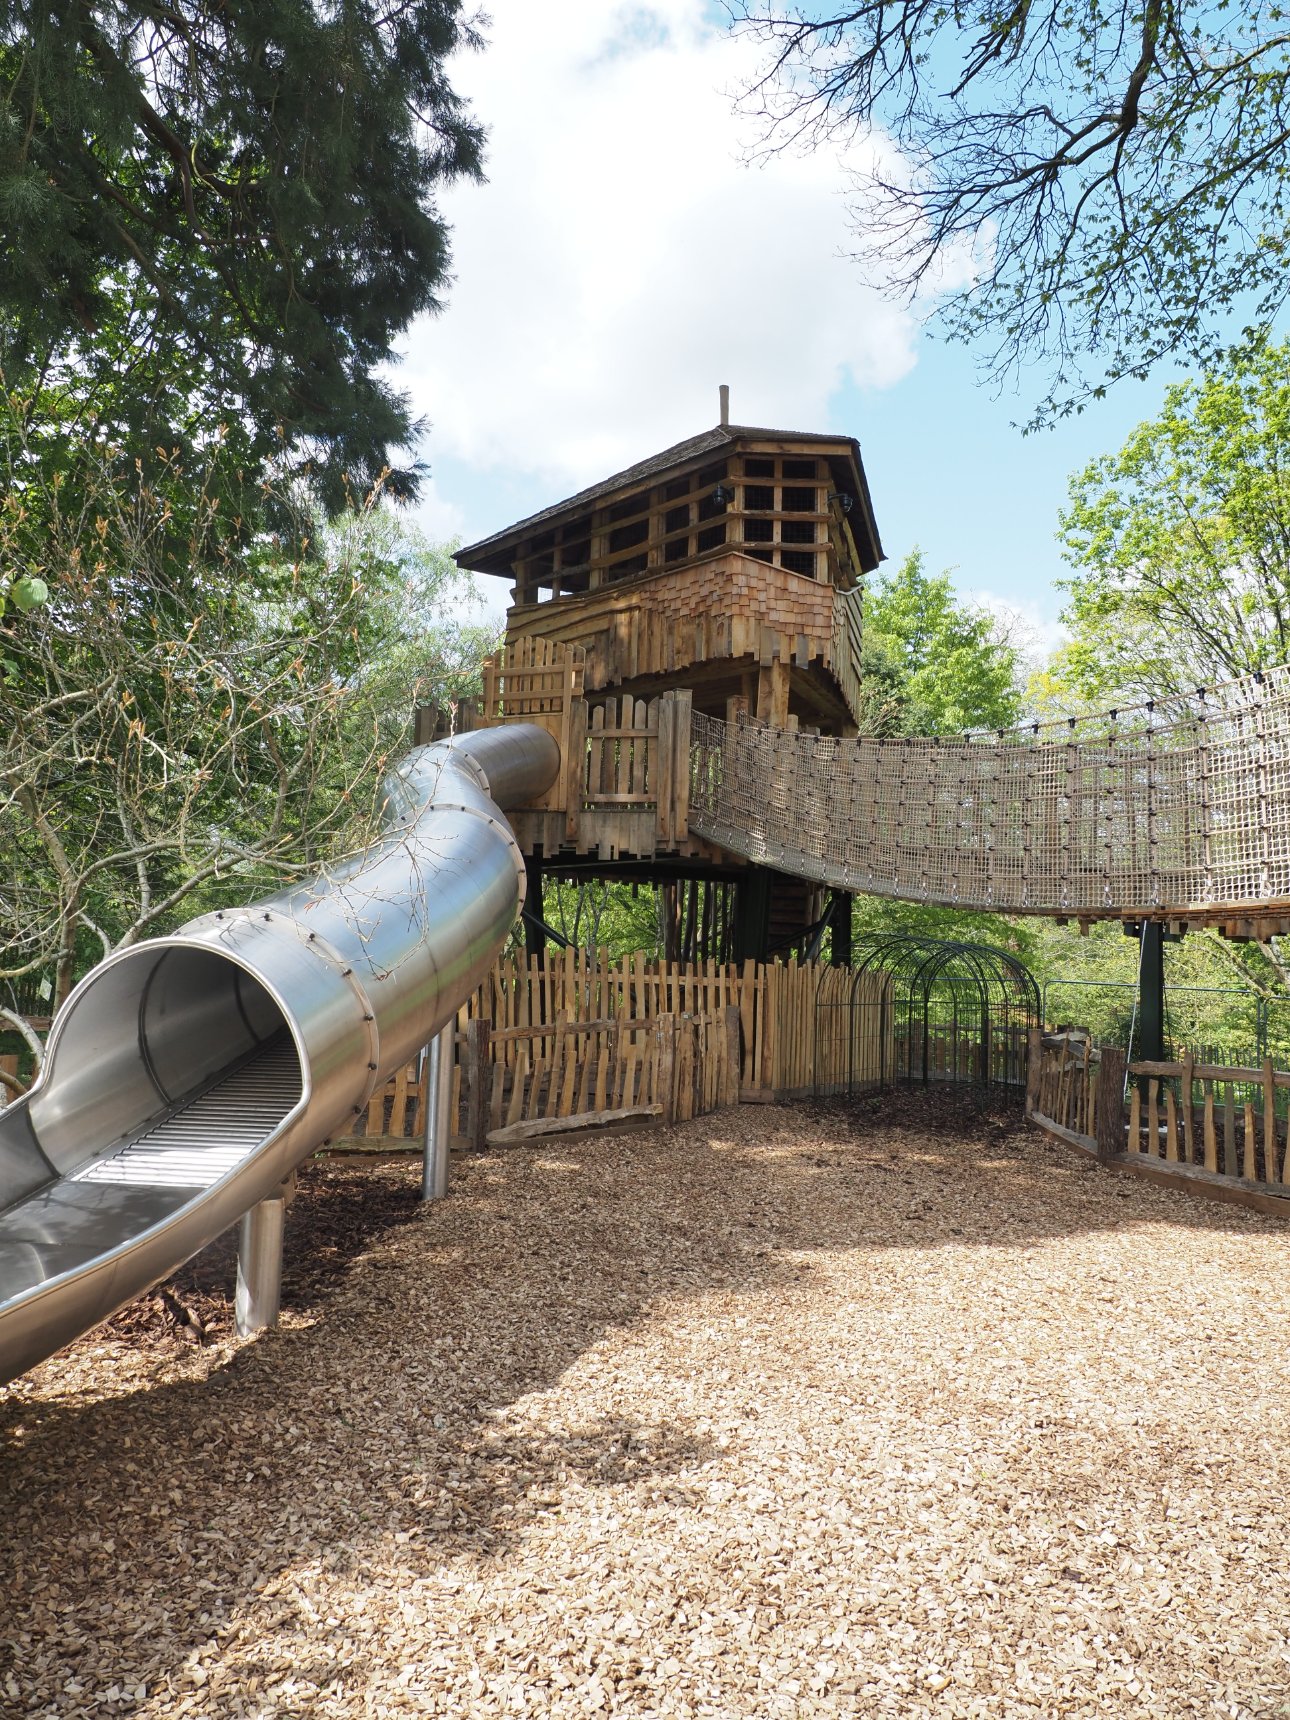 View of a treehouse and slide.